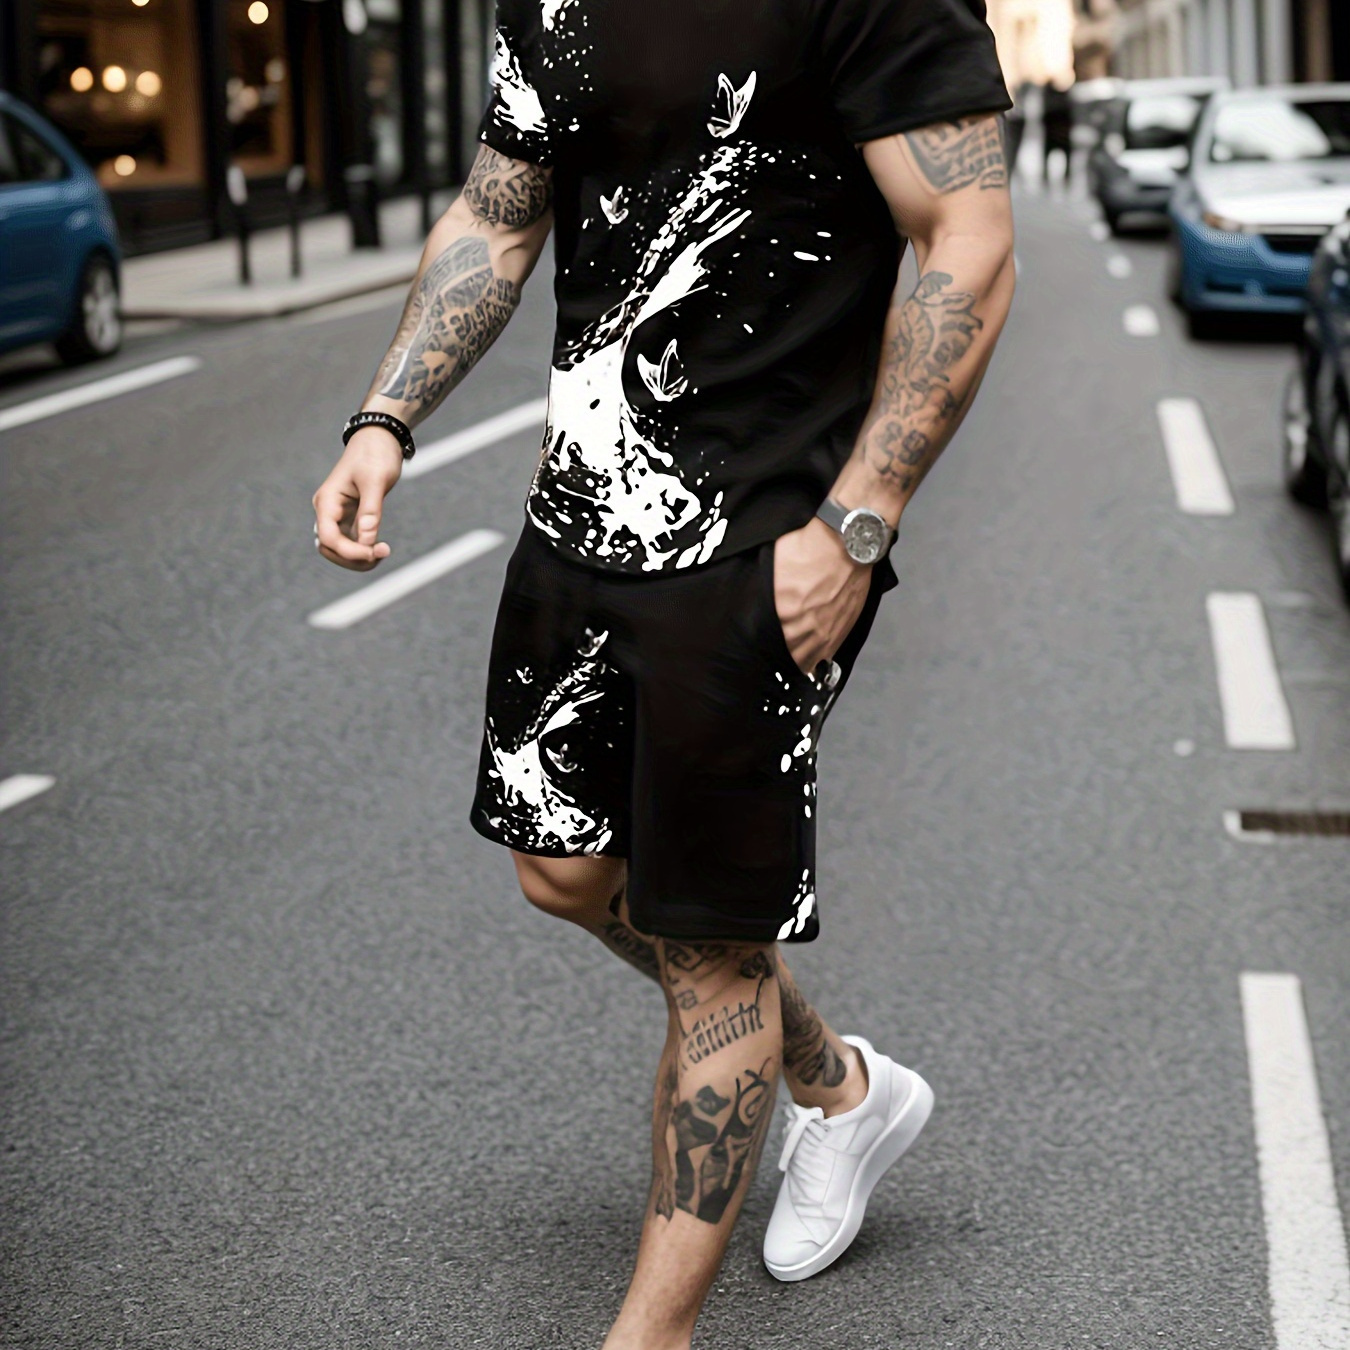 

Plus Size Men's Ink Pattern Graphic Print T Shirt Shorts Set For Summer, Trendy 2pcs Outfits For Big & Tall Males